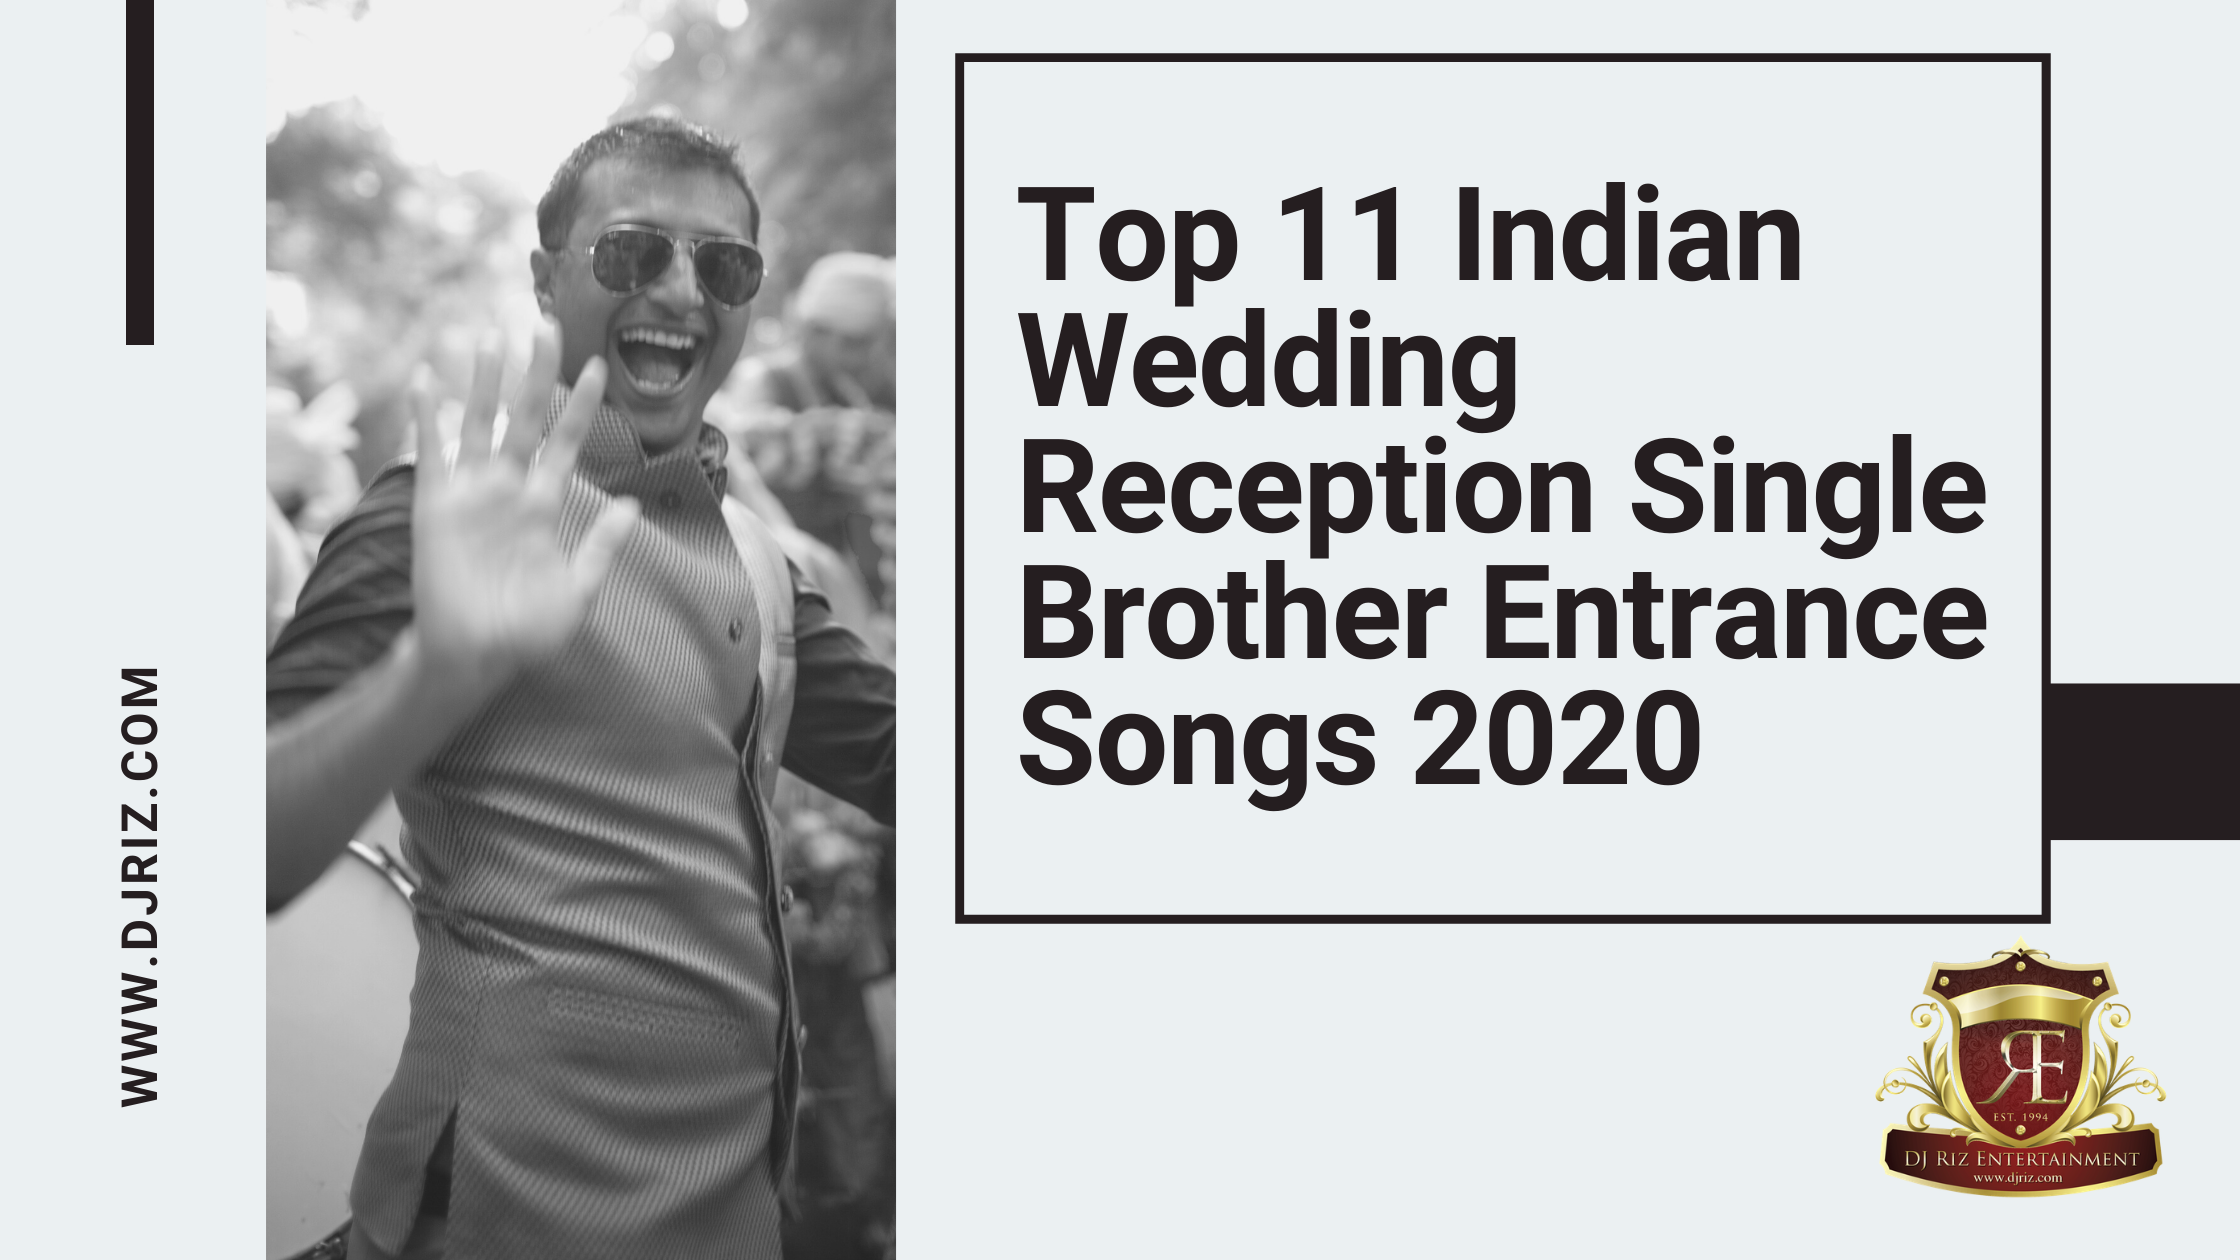 Top 11 Indian Wedding Reception Single Brother Entrance Songs 2020